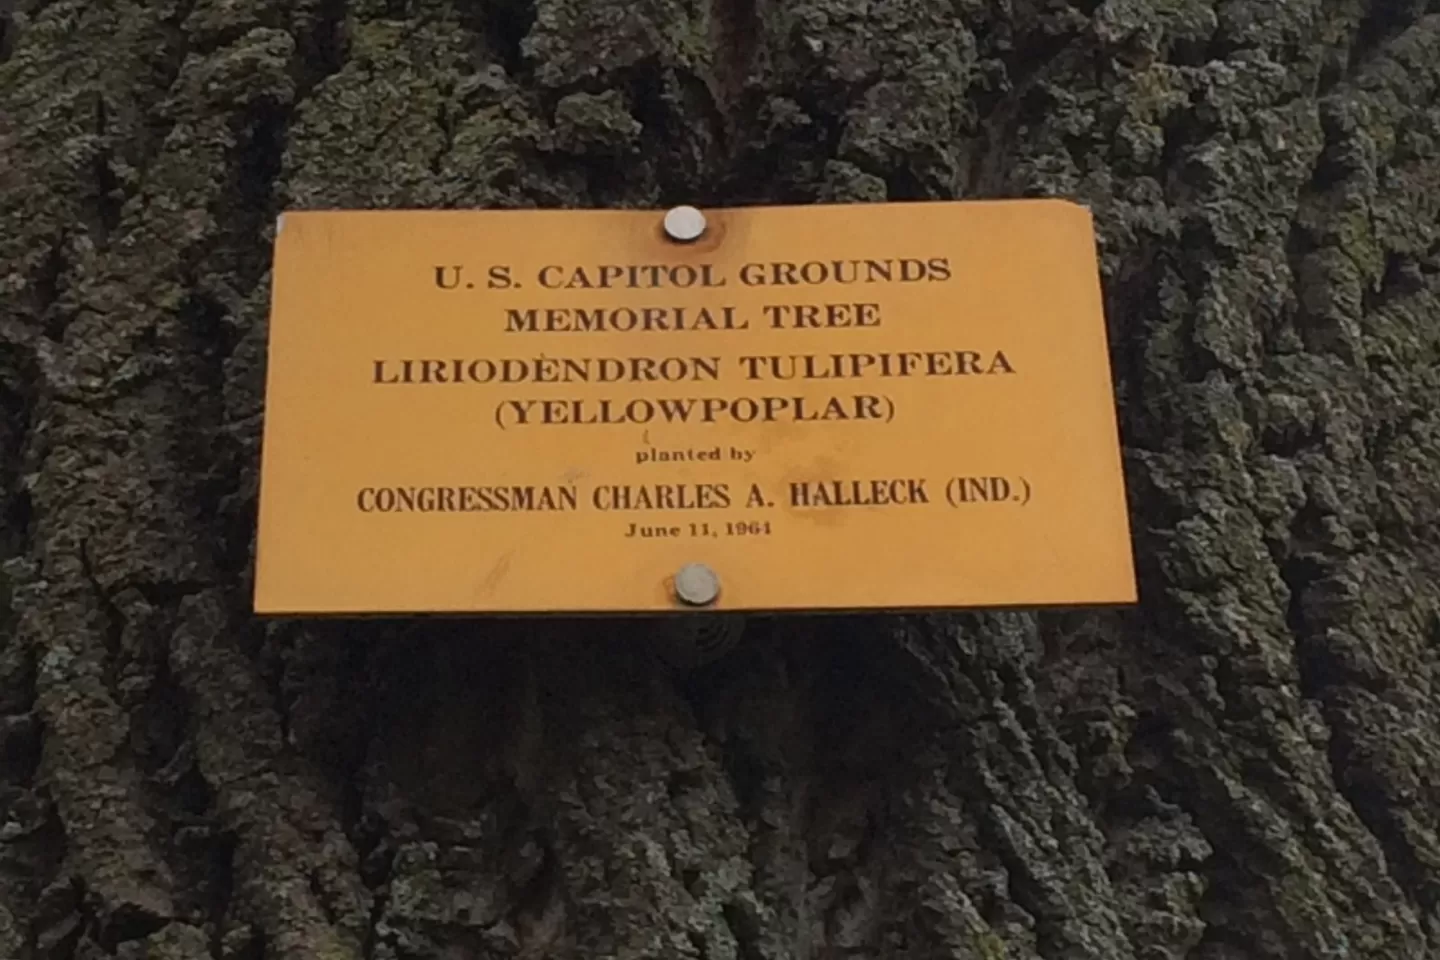 Plaque that reads: U.S. Capitol Grounds Memorial Tree  Liriodendron tulipifera (Yellow poplar)  planted by  Congressman Charles A. Halleck (Ind.)  June 11, 1961